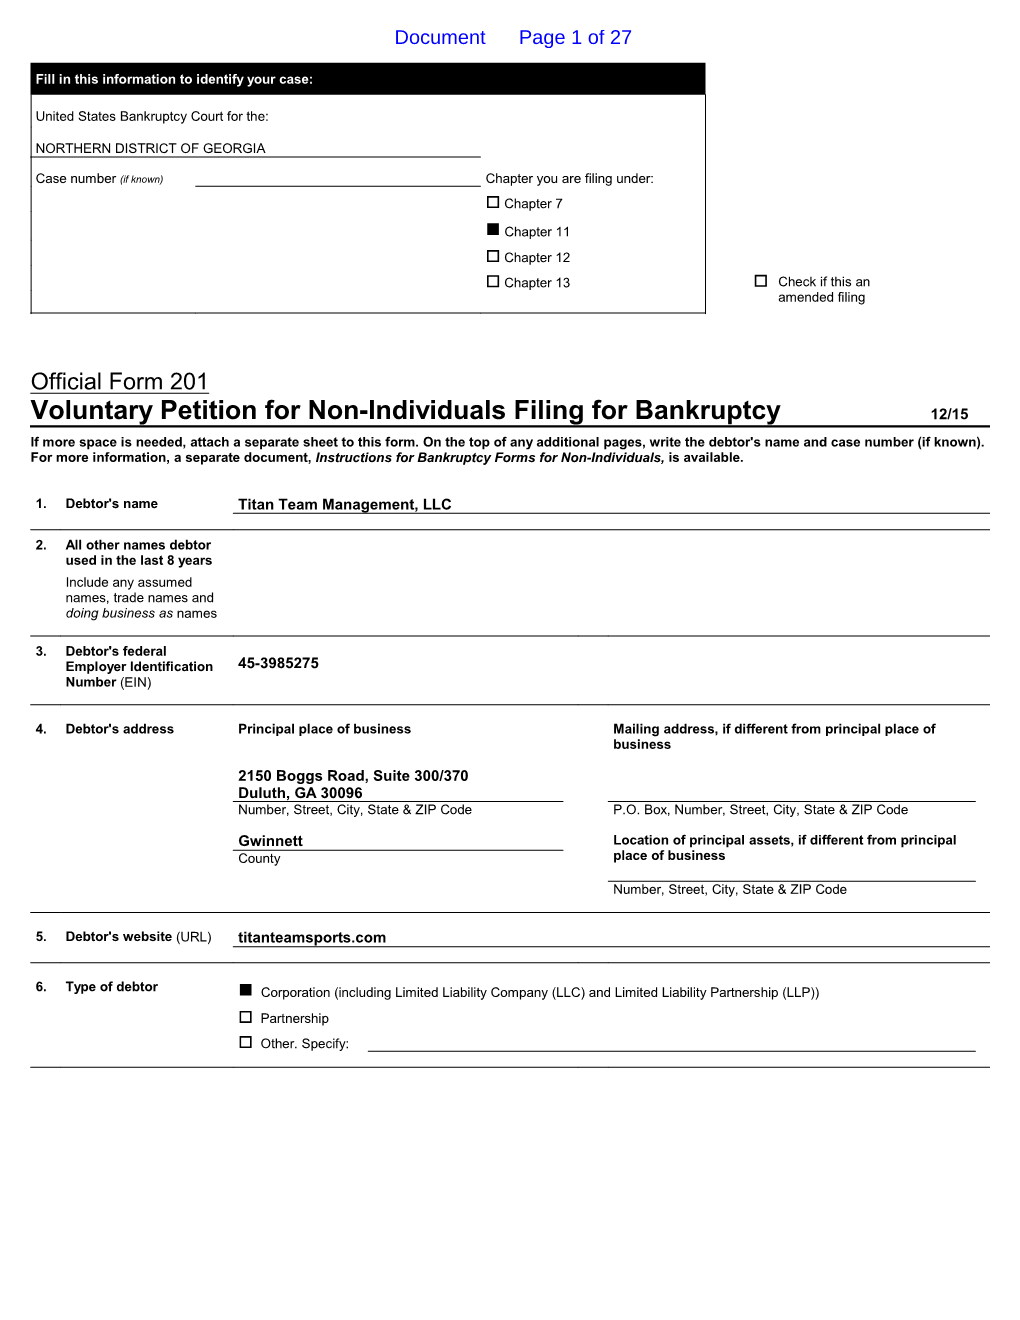 Voluntary Petition for Non-Individuals Filing for Bankruptcy 12/15 If More Space Is Needed, Attach a Separate Sheet to This Form